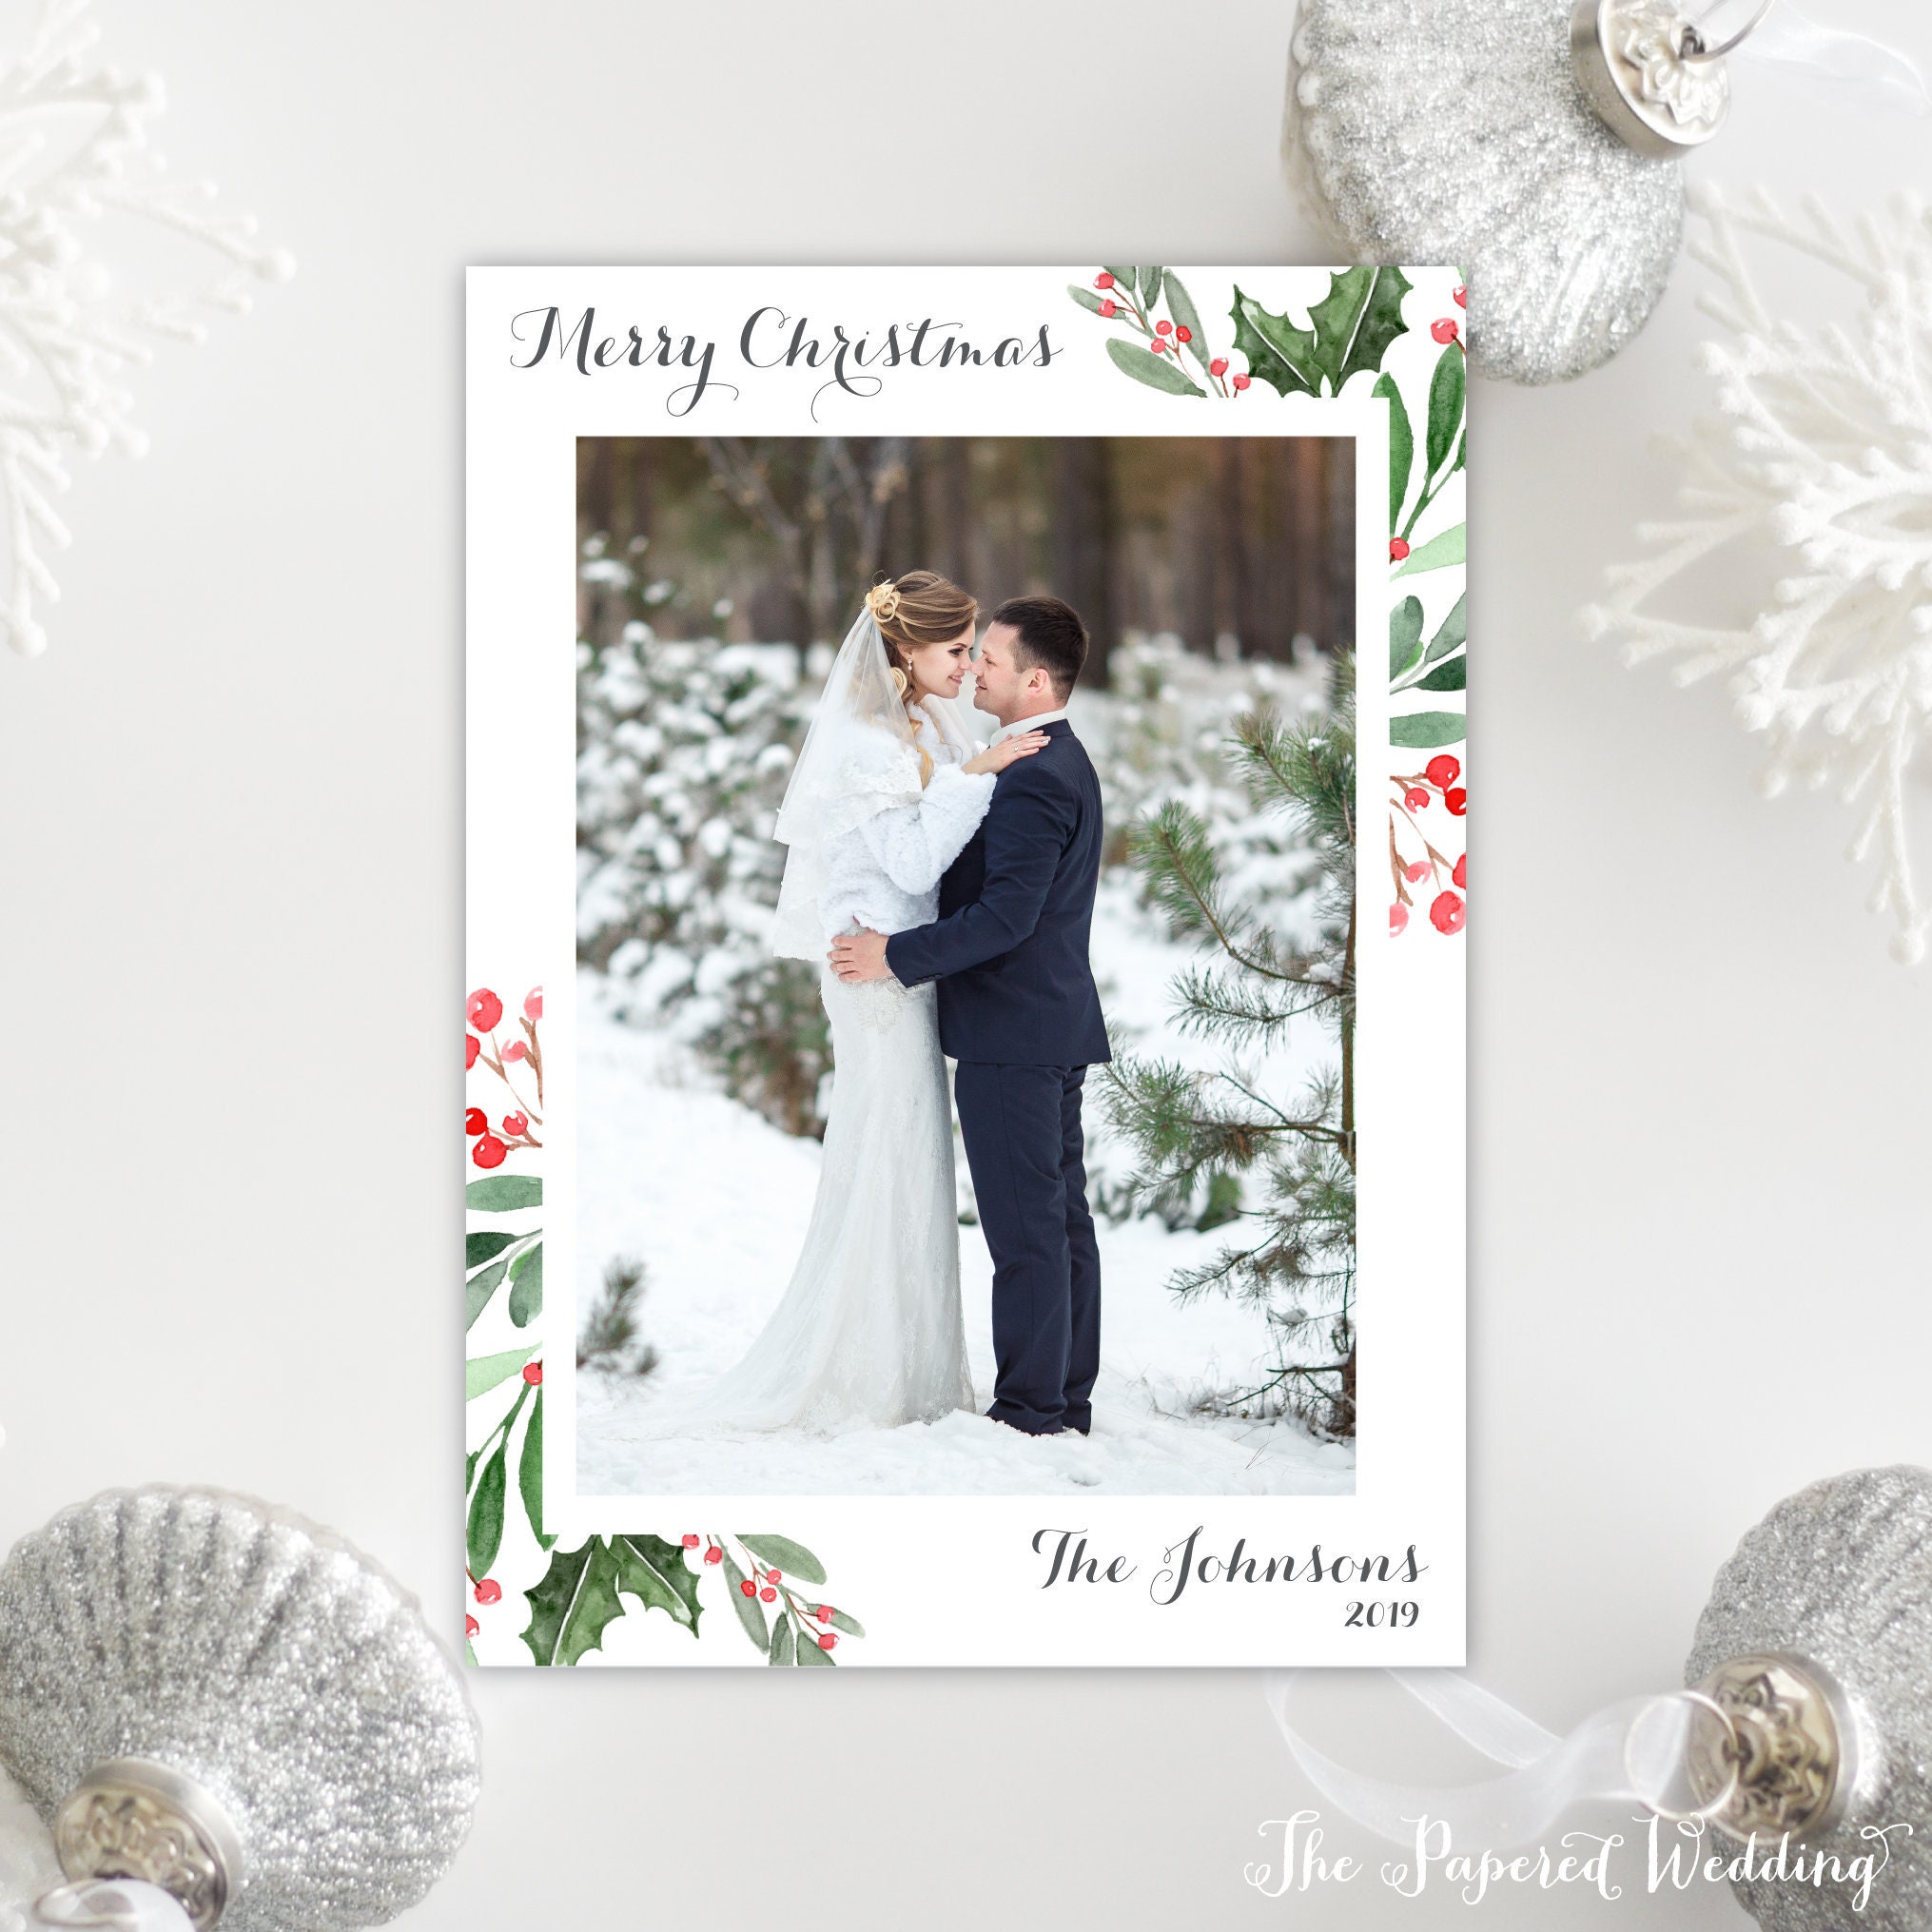 Printable Or Printed Christmas Cards With Holly & Berries - Red Green Photo Picture Holiday 093 P1